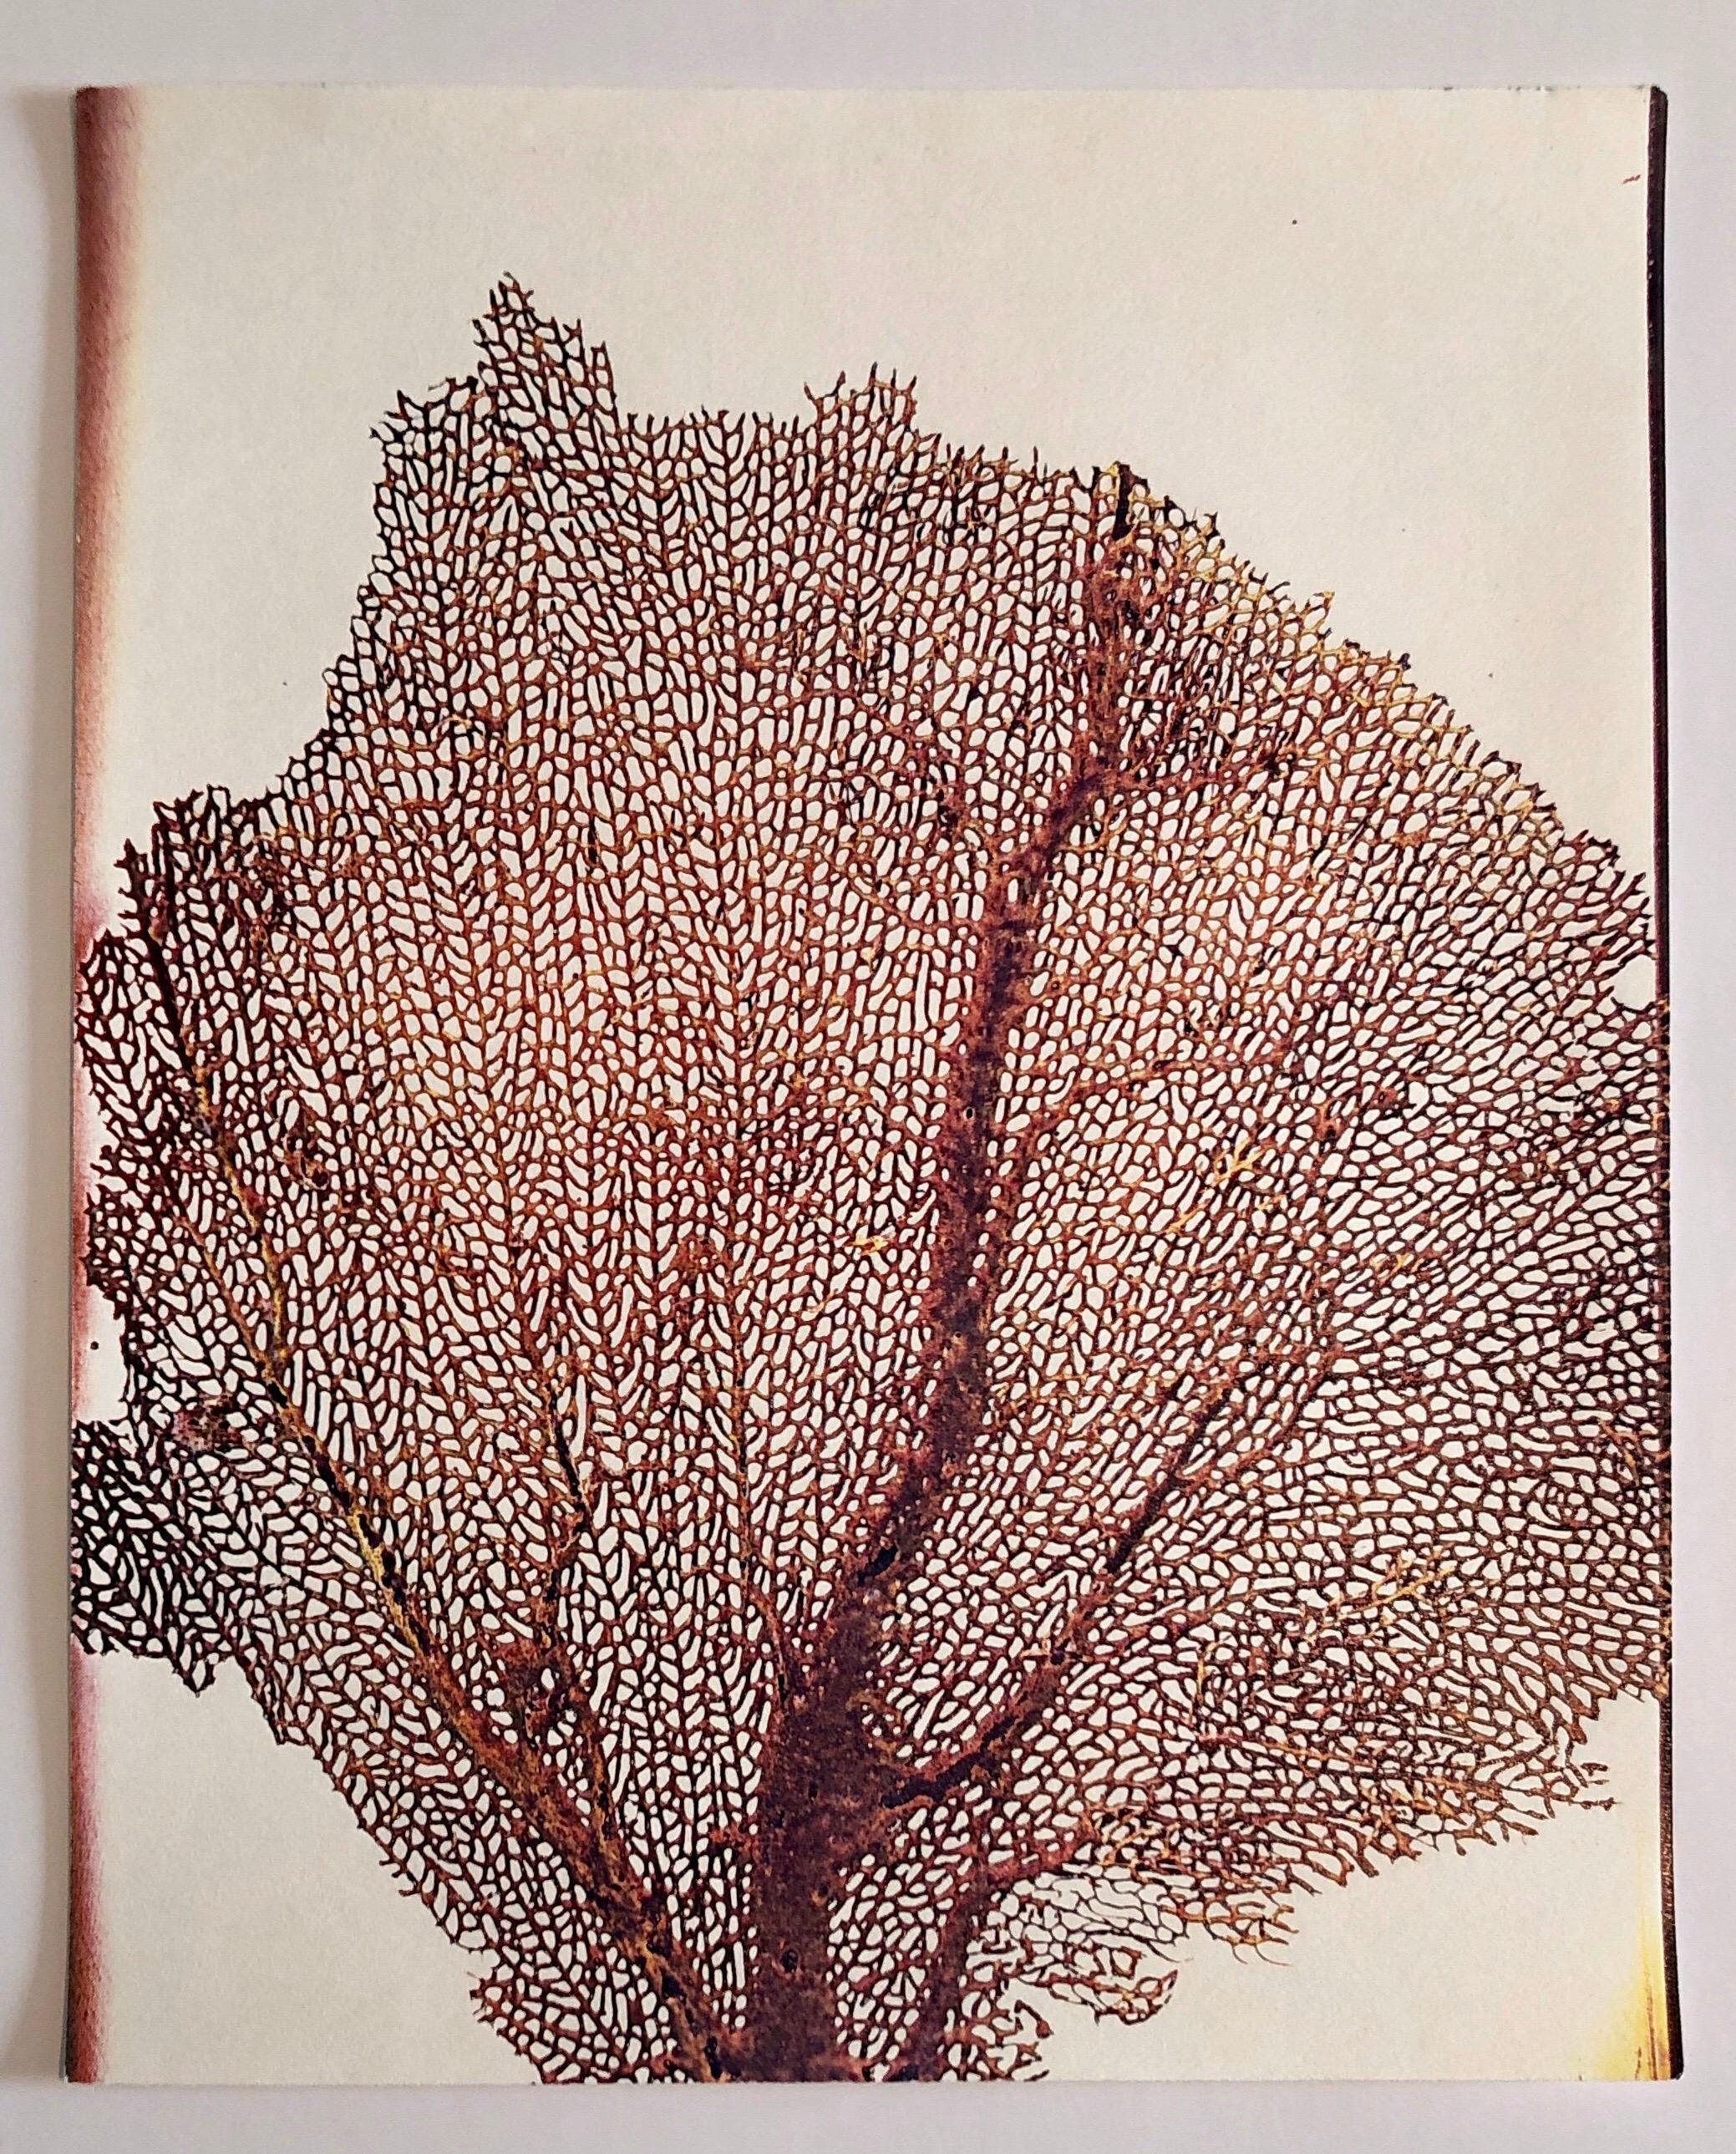 SEASONS (1981)
This is for the single print listed here. (not the outside folder or title sheet)
Title: Sea Fan. This one is hand signed and dated verso.
Seasons explores the seasons of Man, Woman, Child, Civilization, Nature and Technology. First